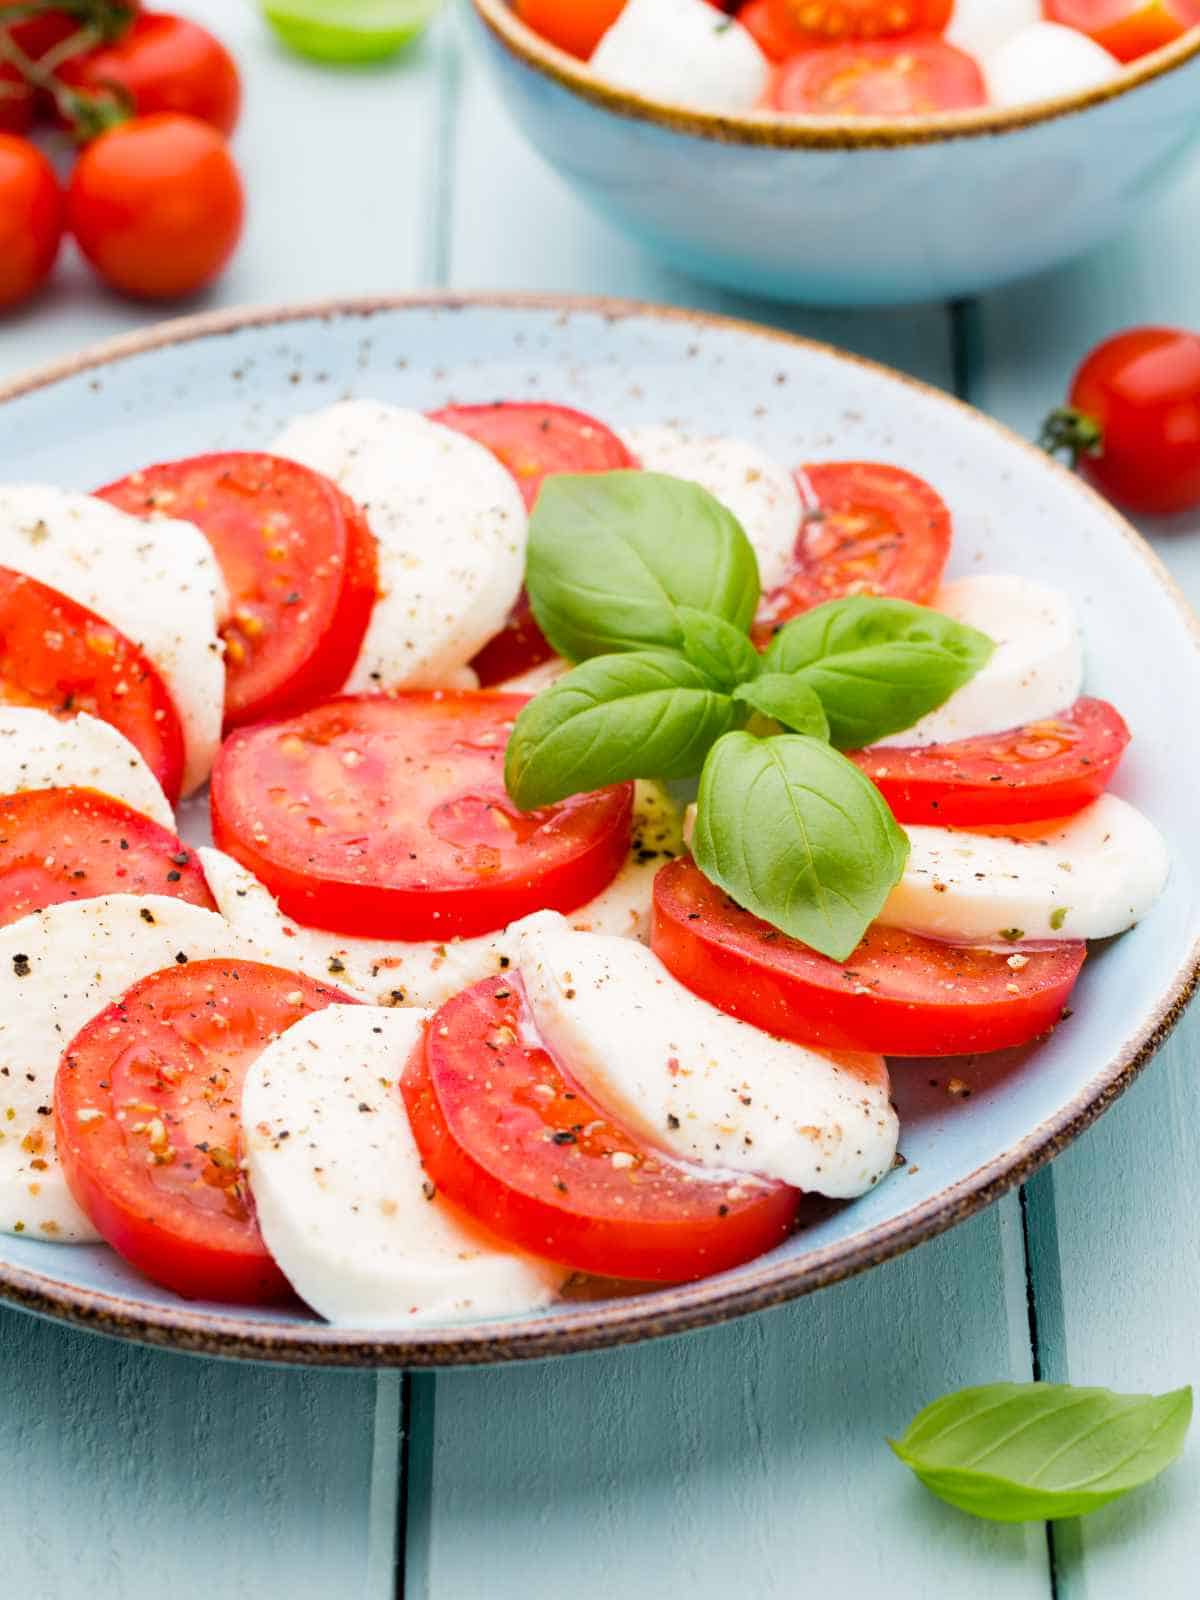 Tomatoes, mozzarella cheese, basil and spices on gray slate stone chalkboard. Italian traditional caprese salad ingredients.